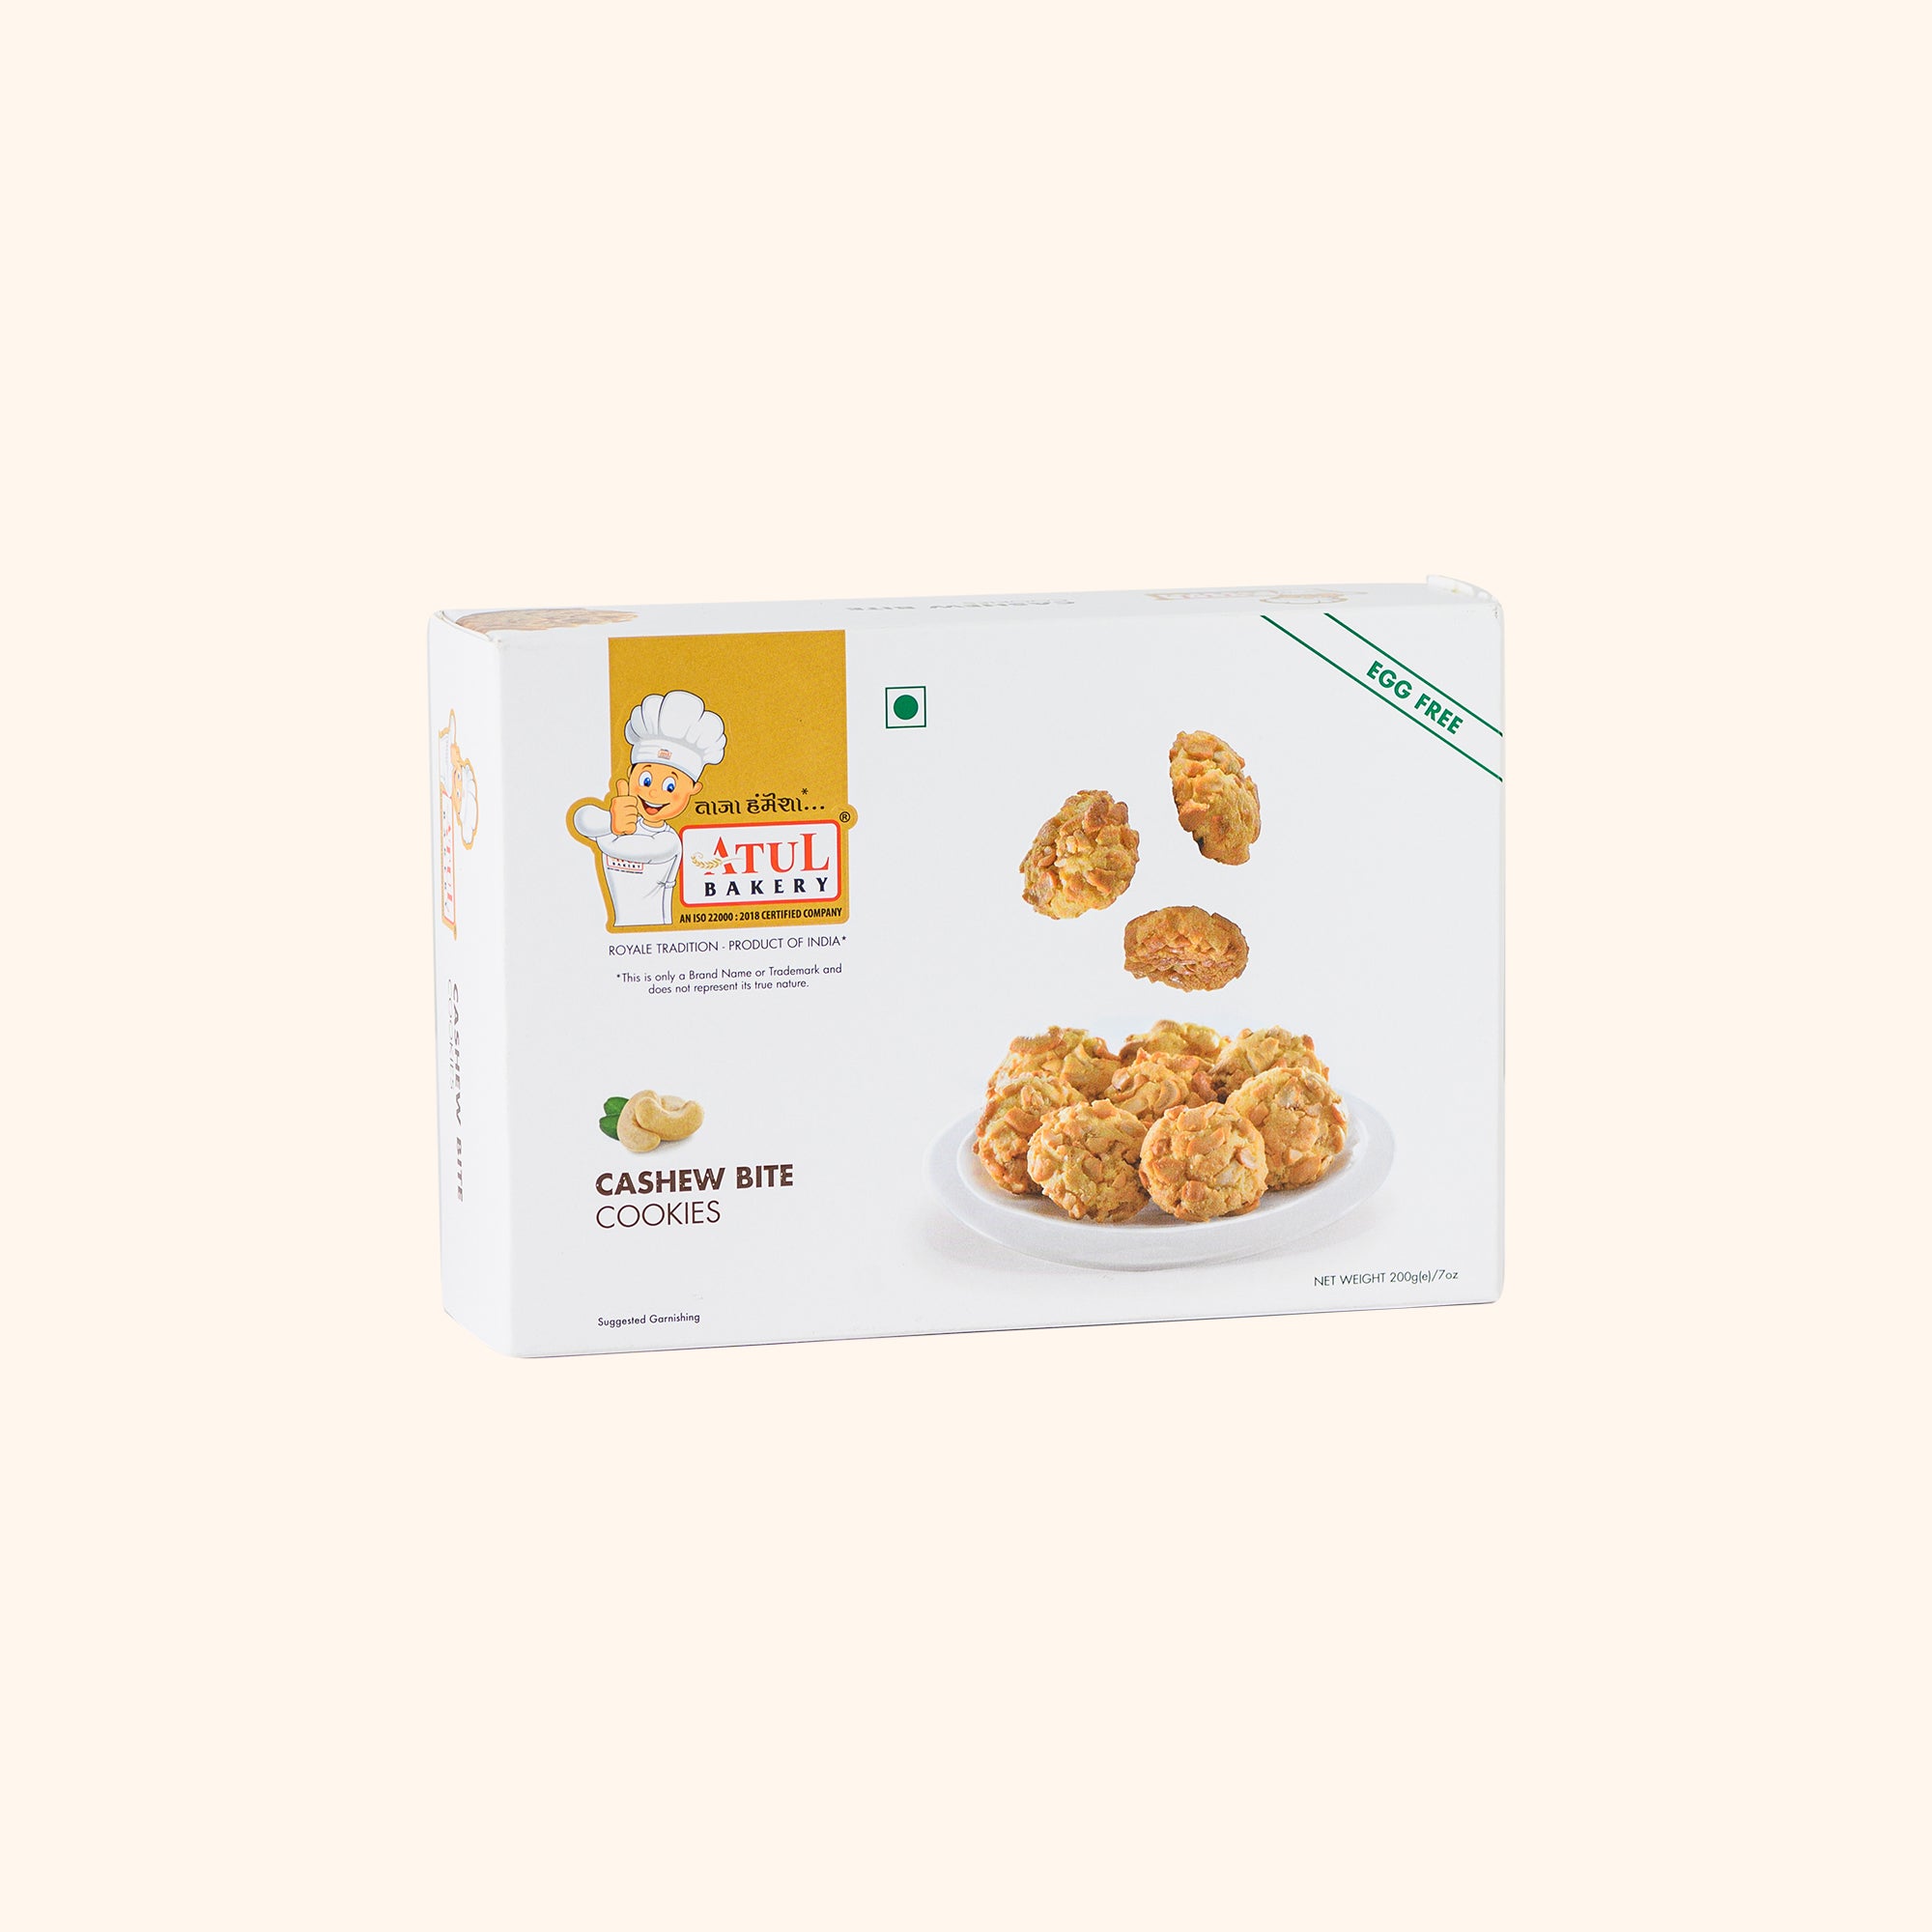 Atul Bakery CASHEW BITE COOKIES || Healthy and Hygienic || PRODUCT OF INDIA